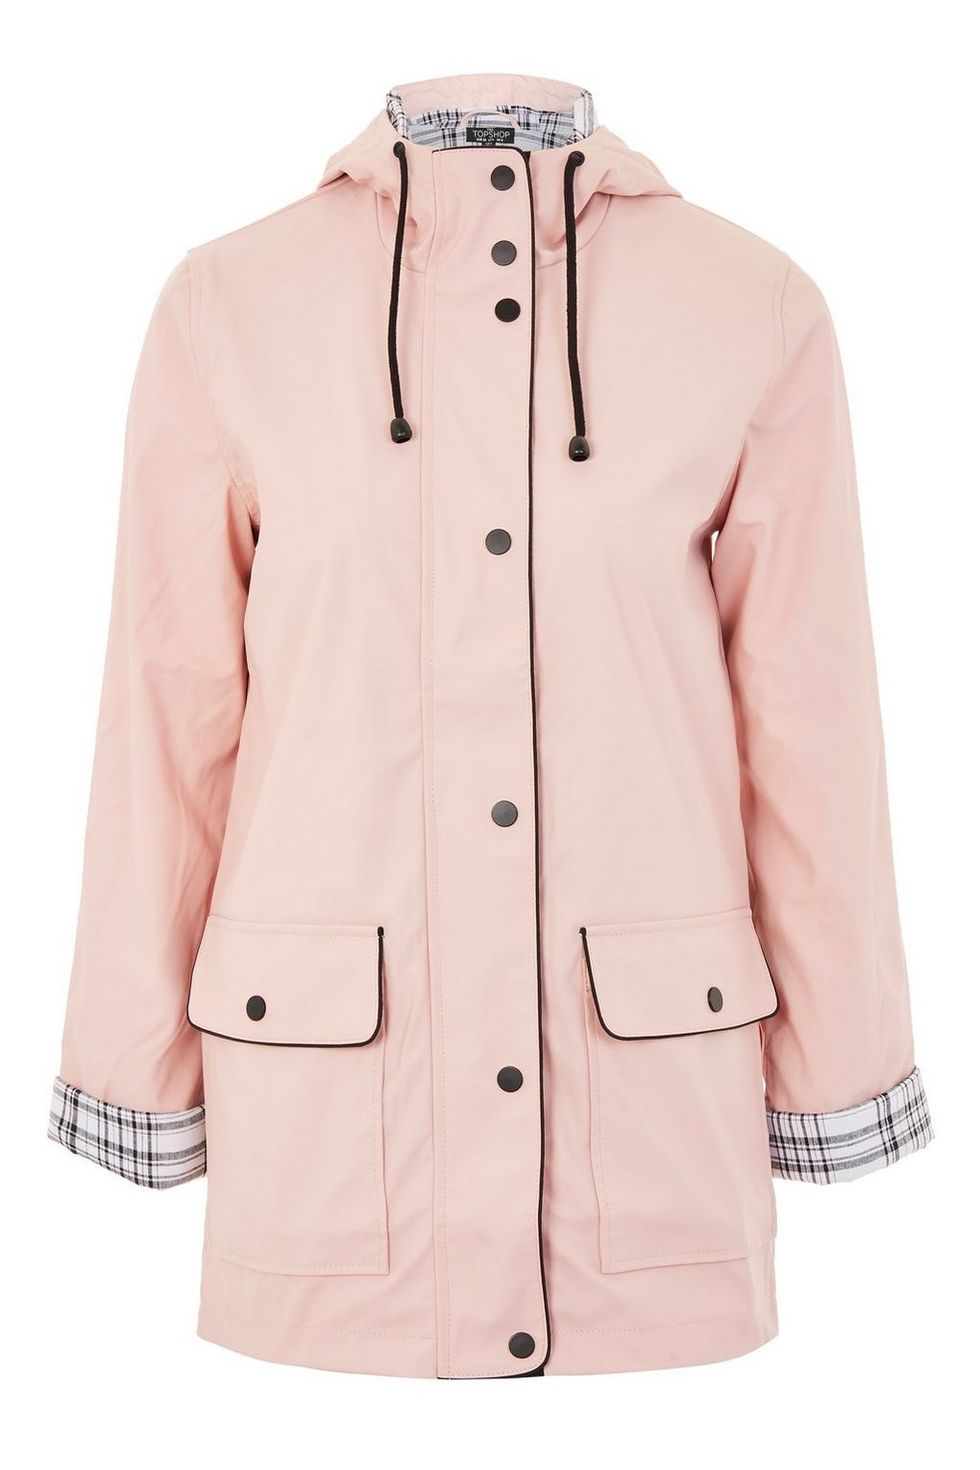 Clothing, Outerwear, Coat, Jacket, Pink, Sleeve, Beige, Trench coat, Hood, Collar, 